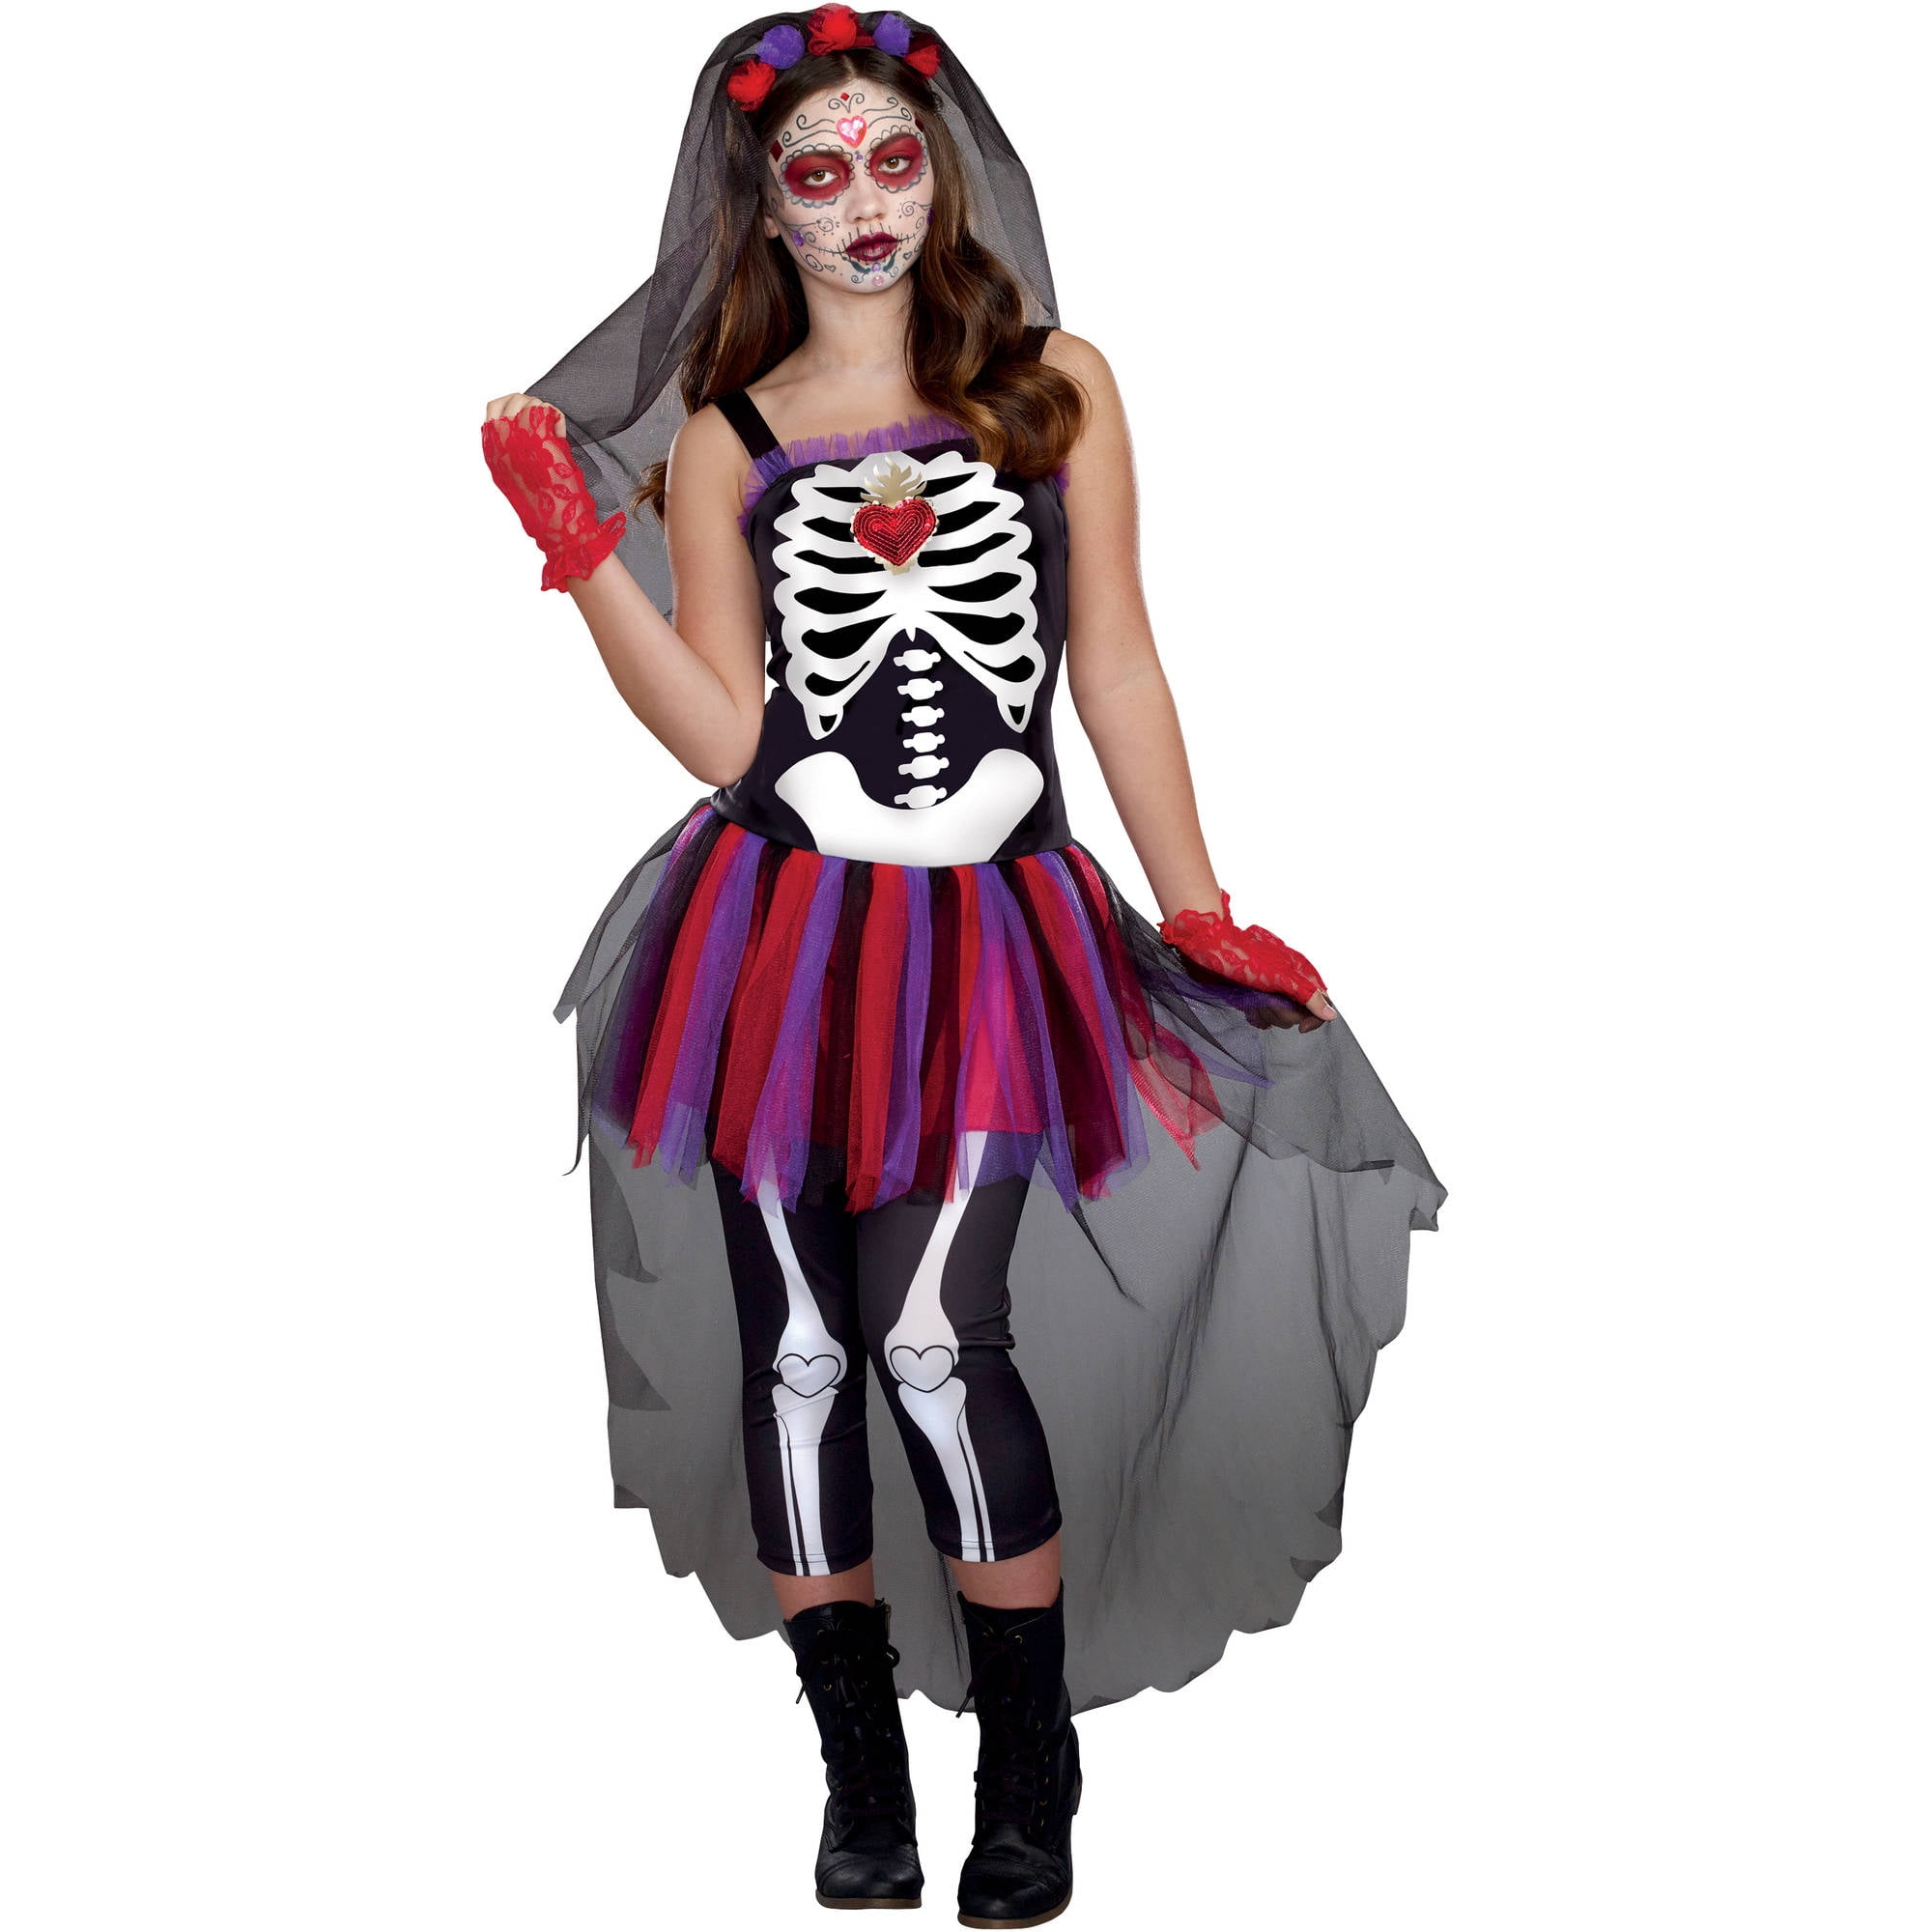 Adult Costume Lady XS Day Of the Dead Darling UK: 6-8